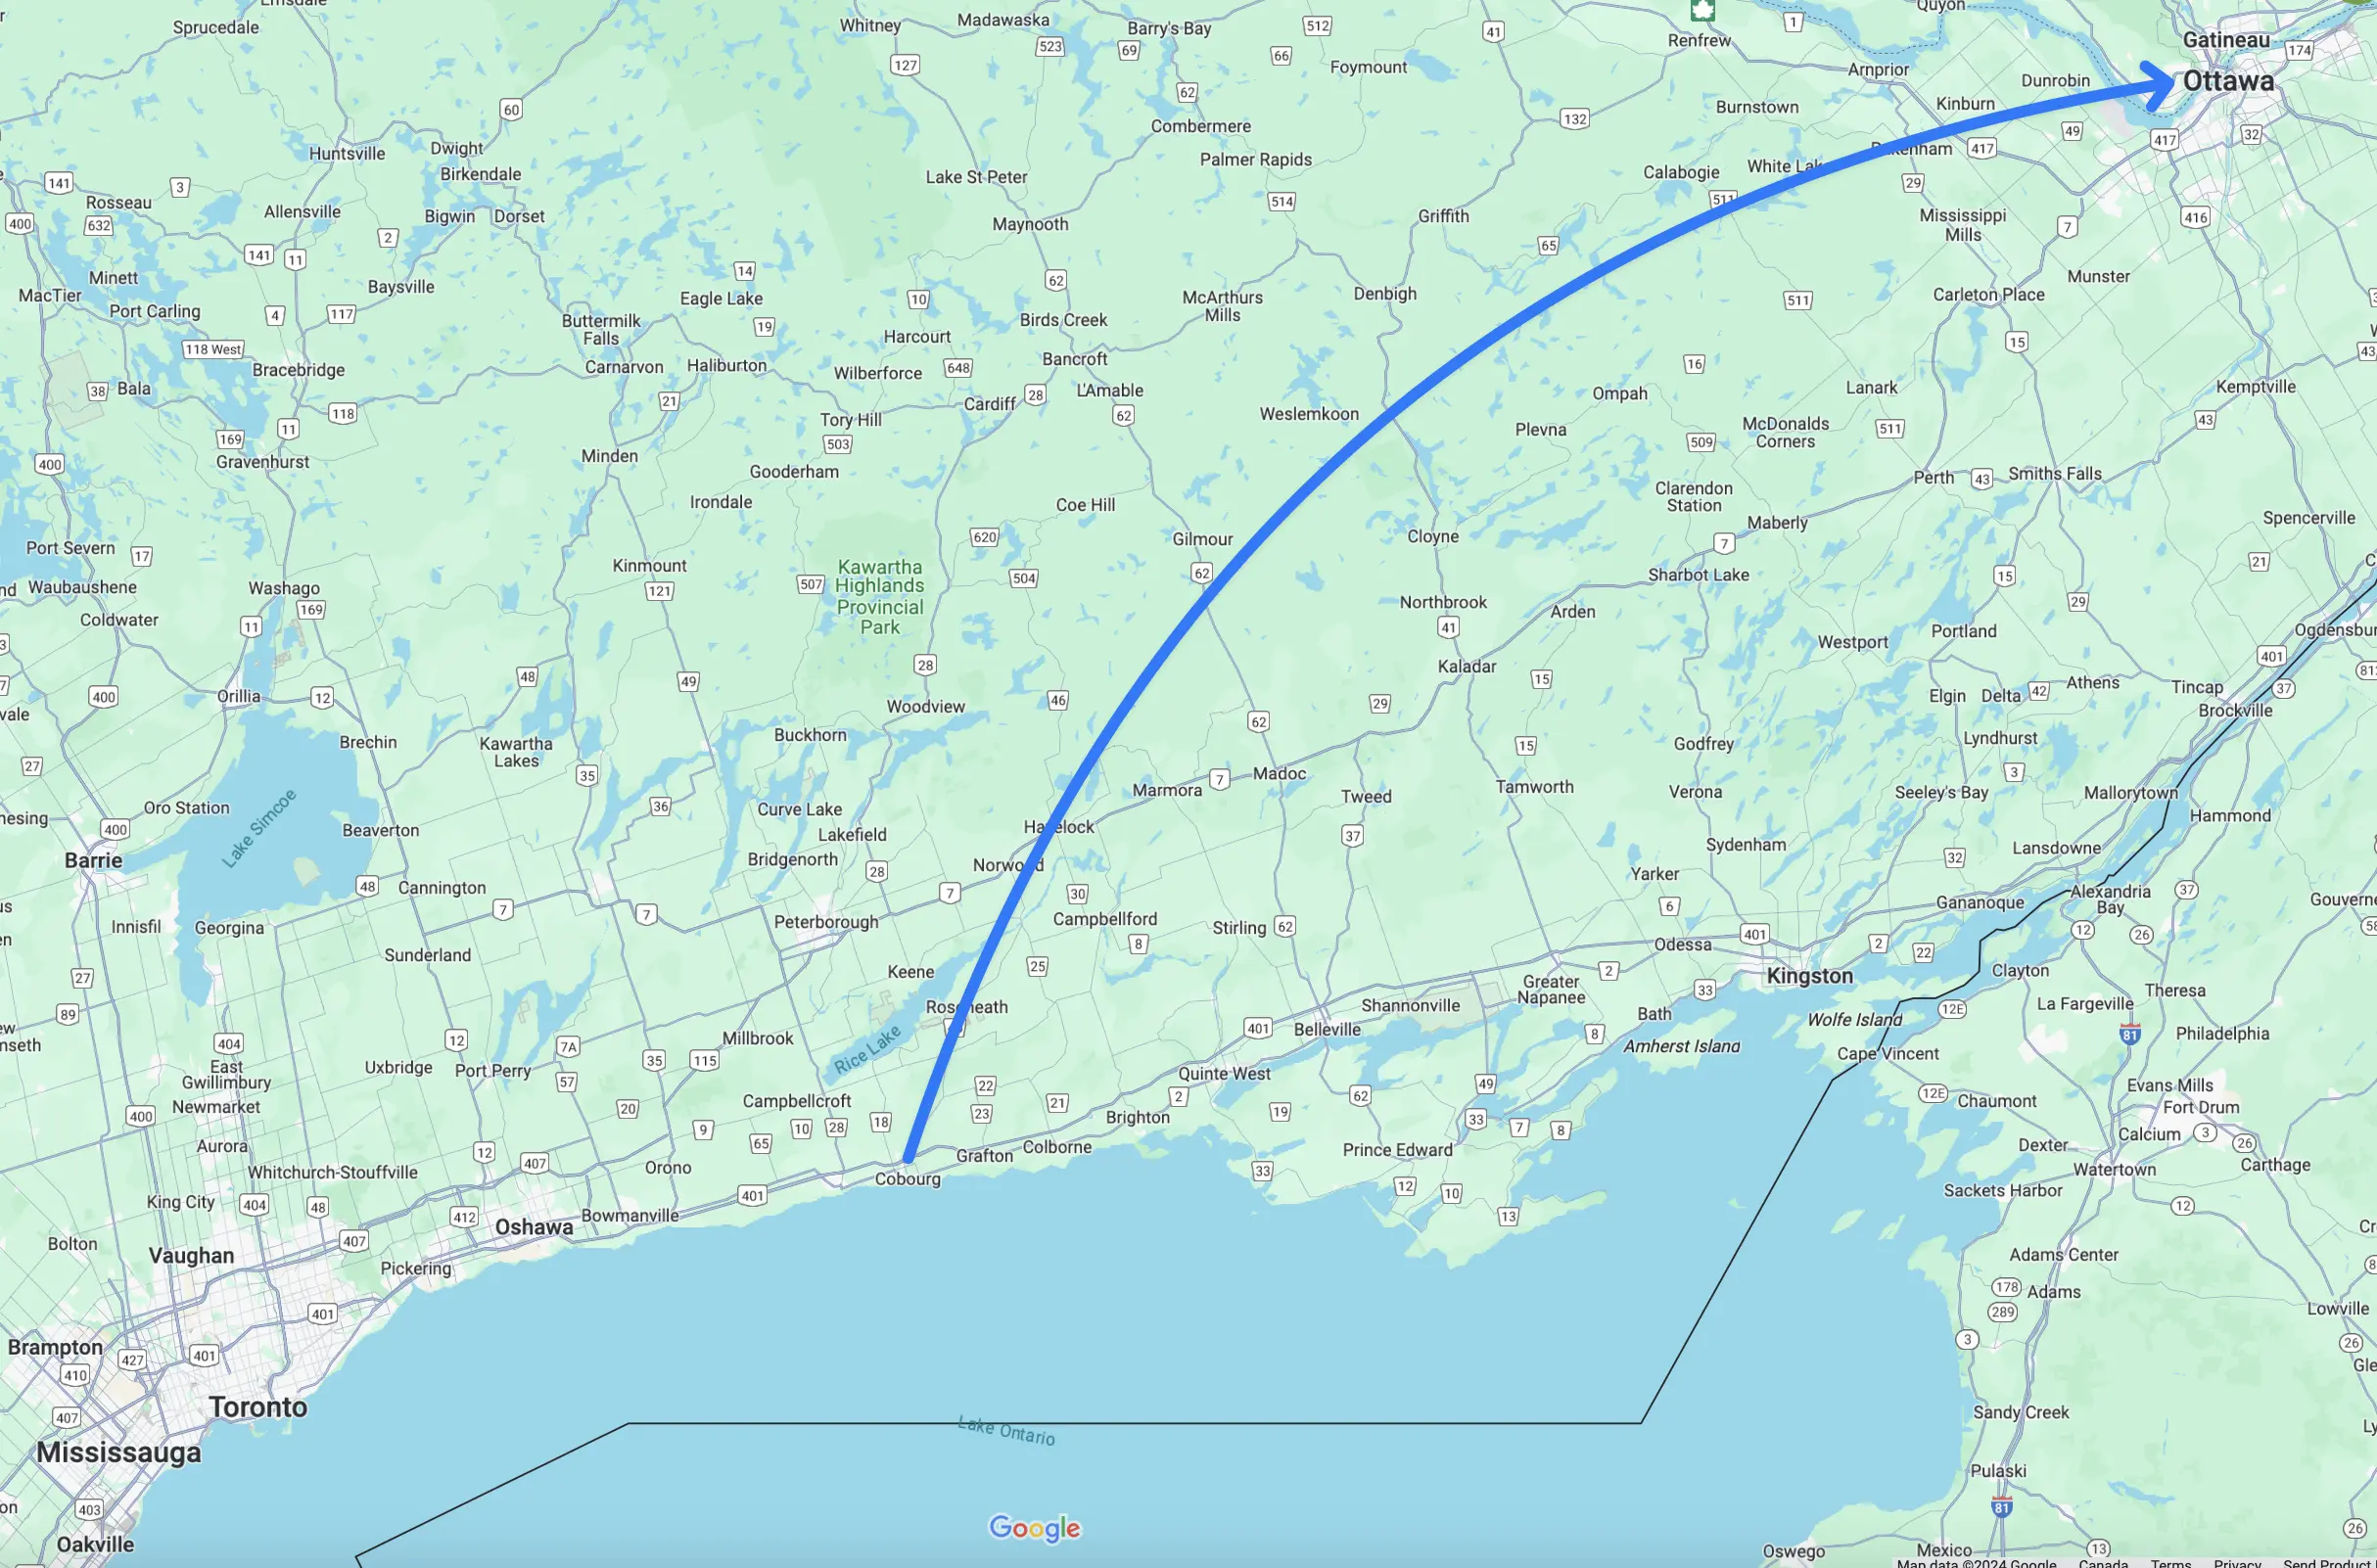 Google maps image of arrow pointing where Ottawa in in relation to Cobourg